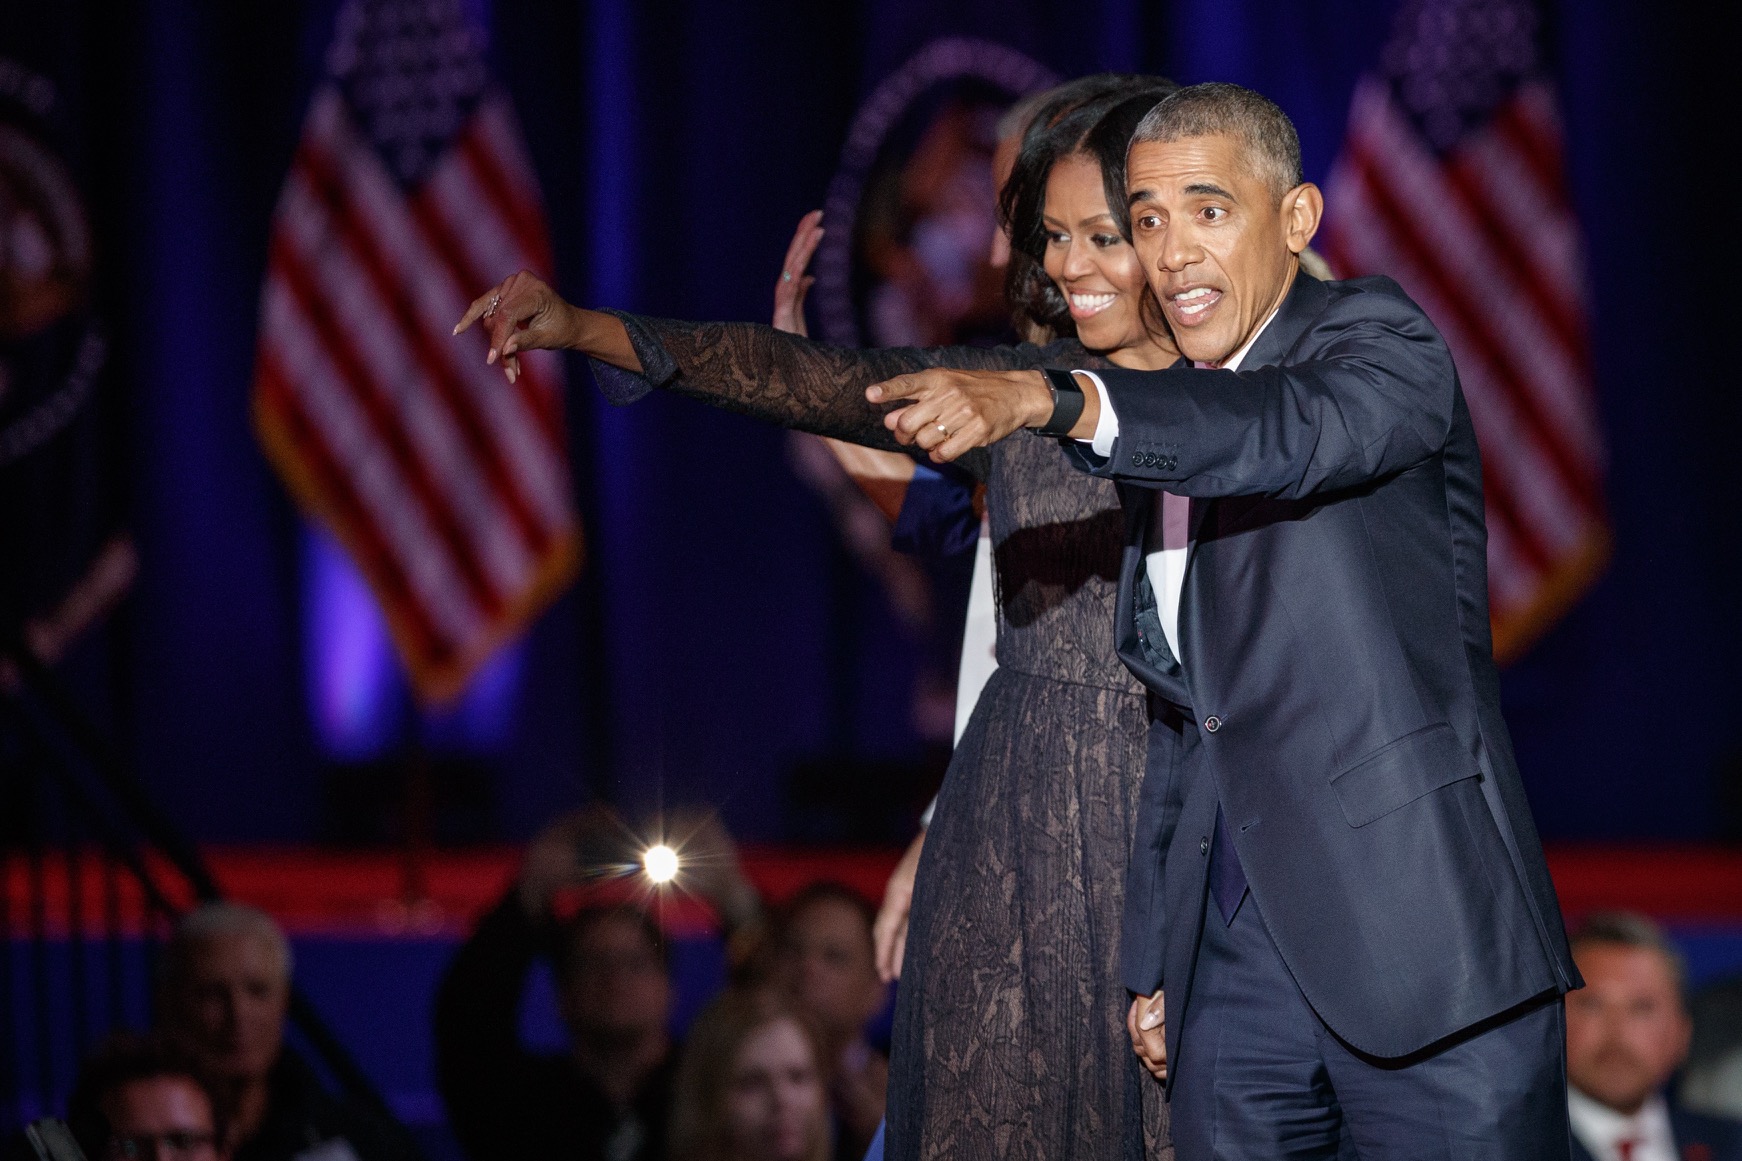 It didn't work, Apple: Barack and Michelle Obama sign a contract with Netflix